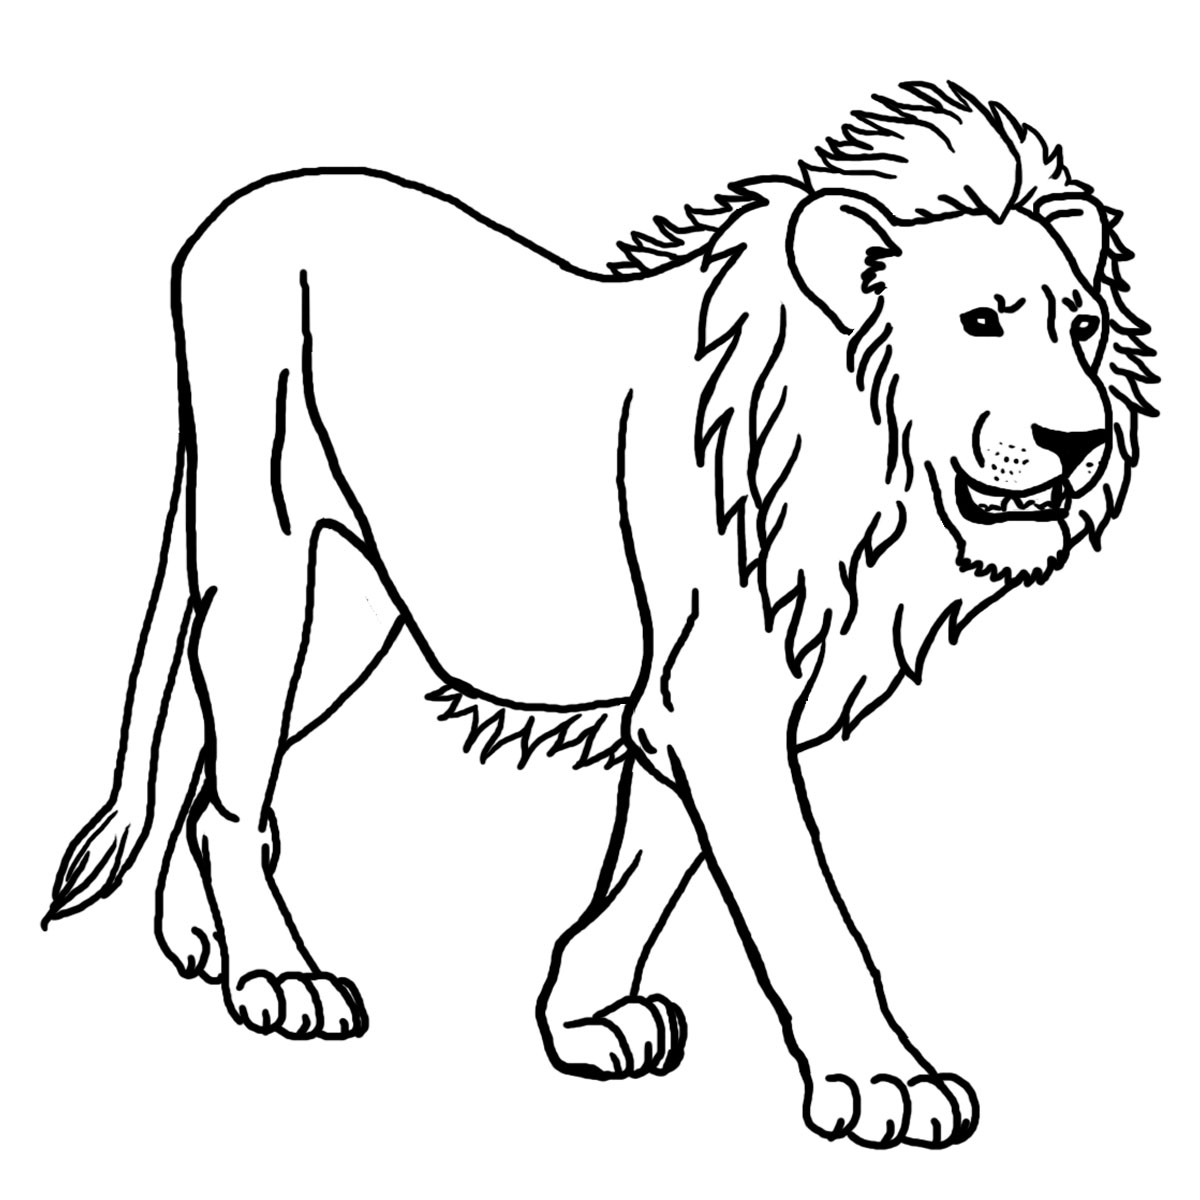 Download Lion free to color for children - Lion Kids Coloring Pages